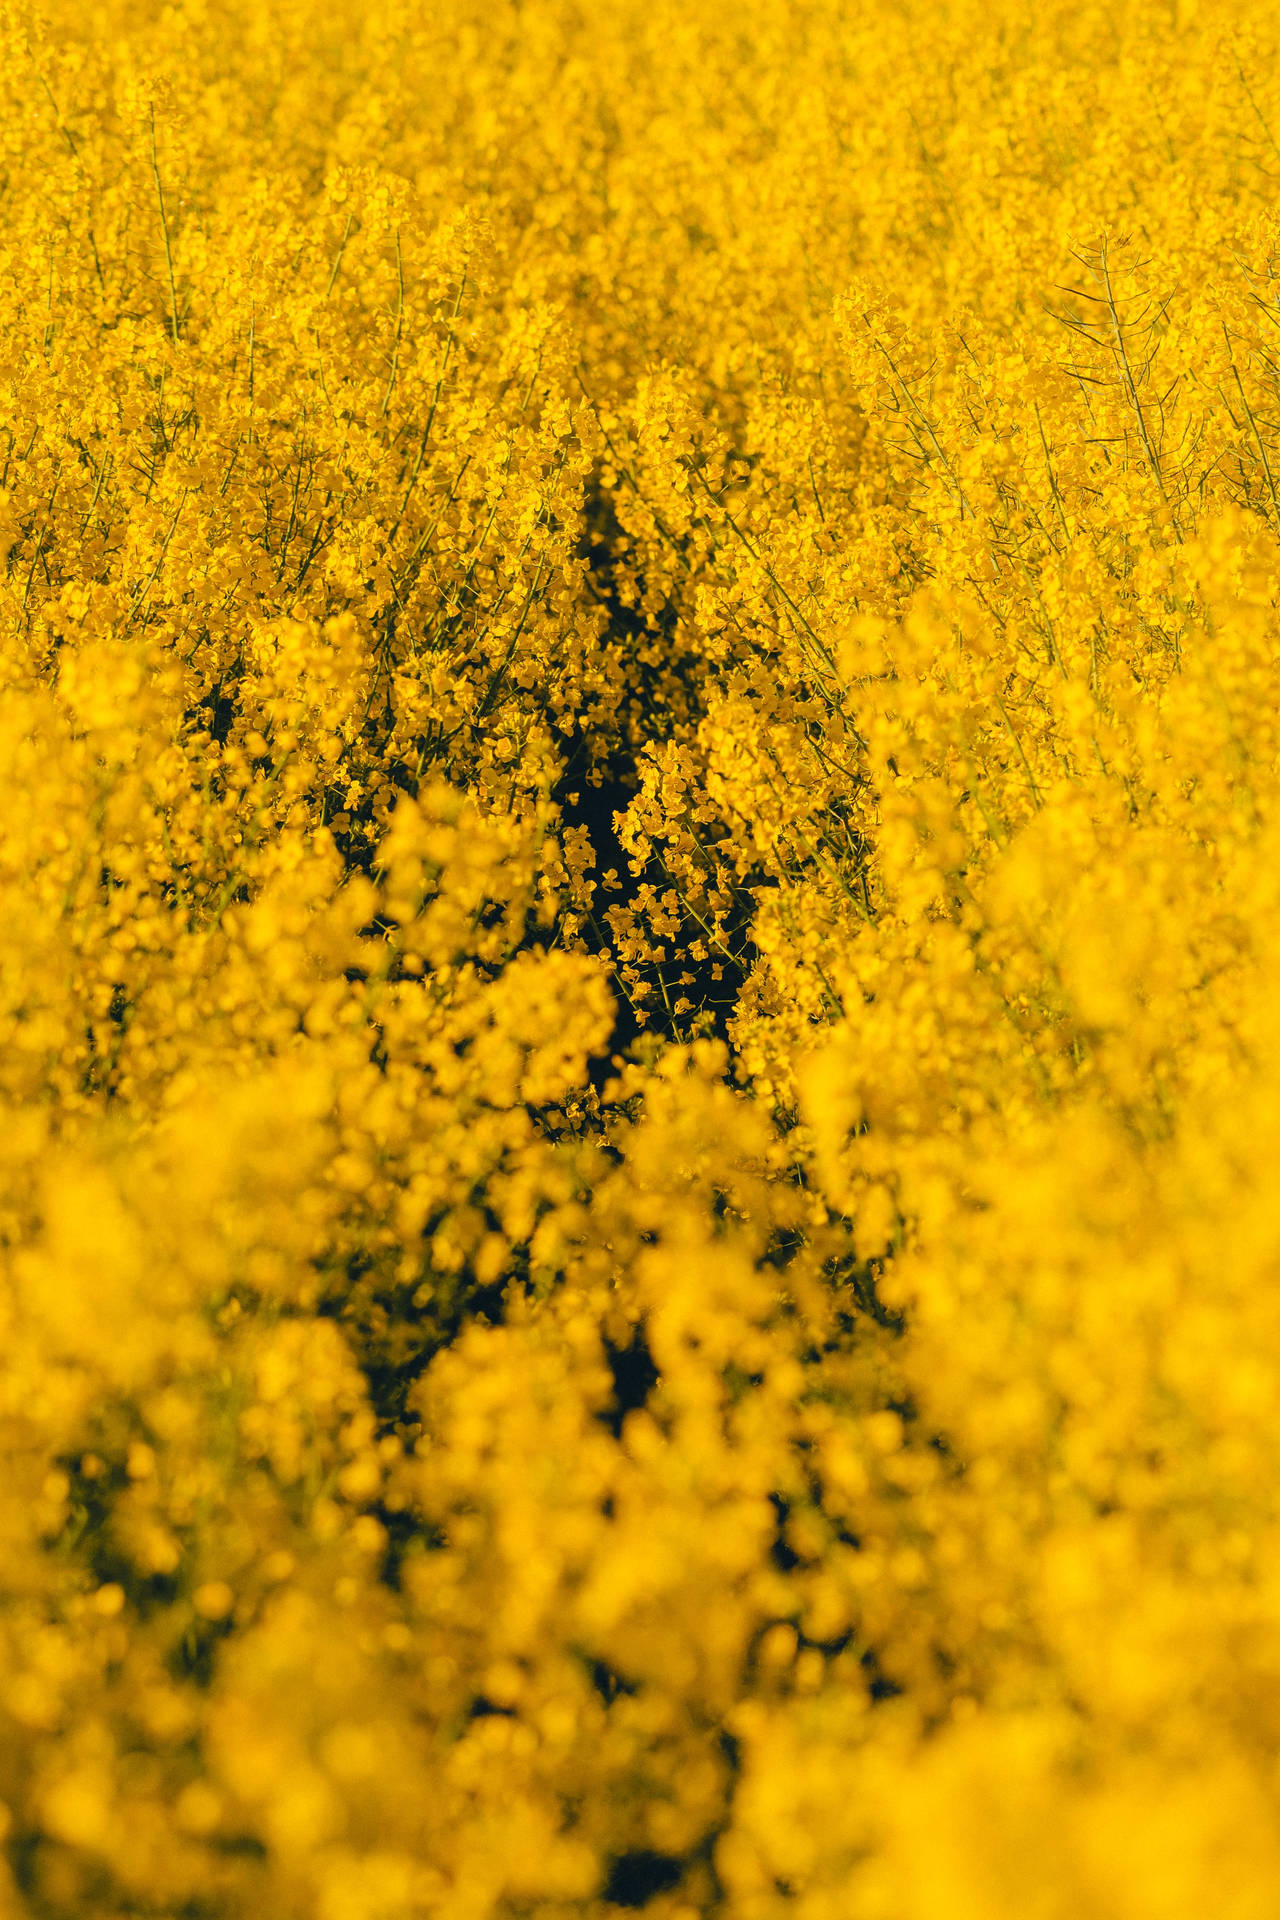 Yellow 2581X3872 Wallpaper and Background Image